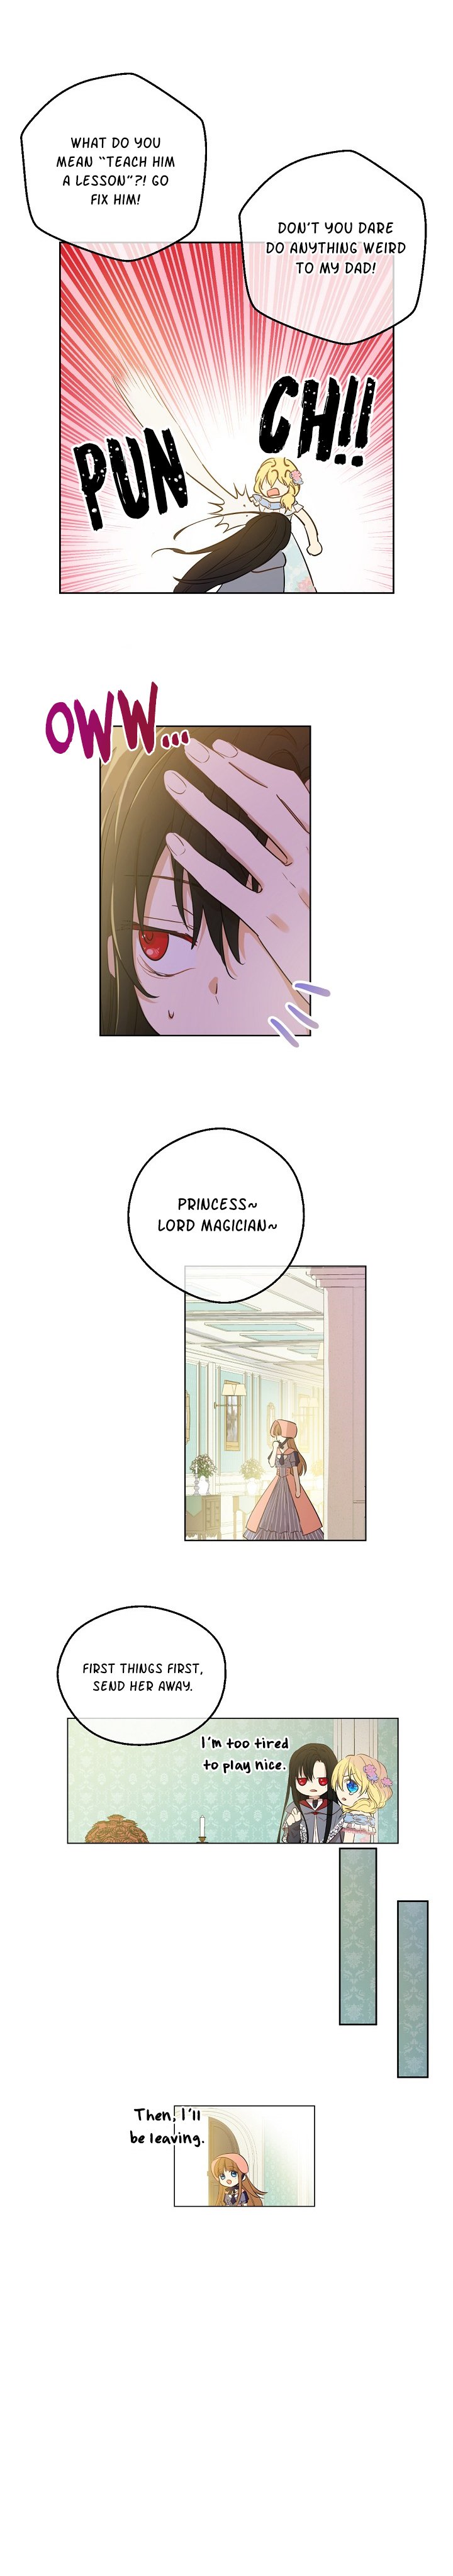 Suddenly Became A Princess One Day ch.69